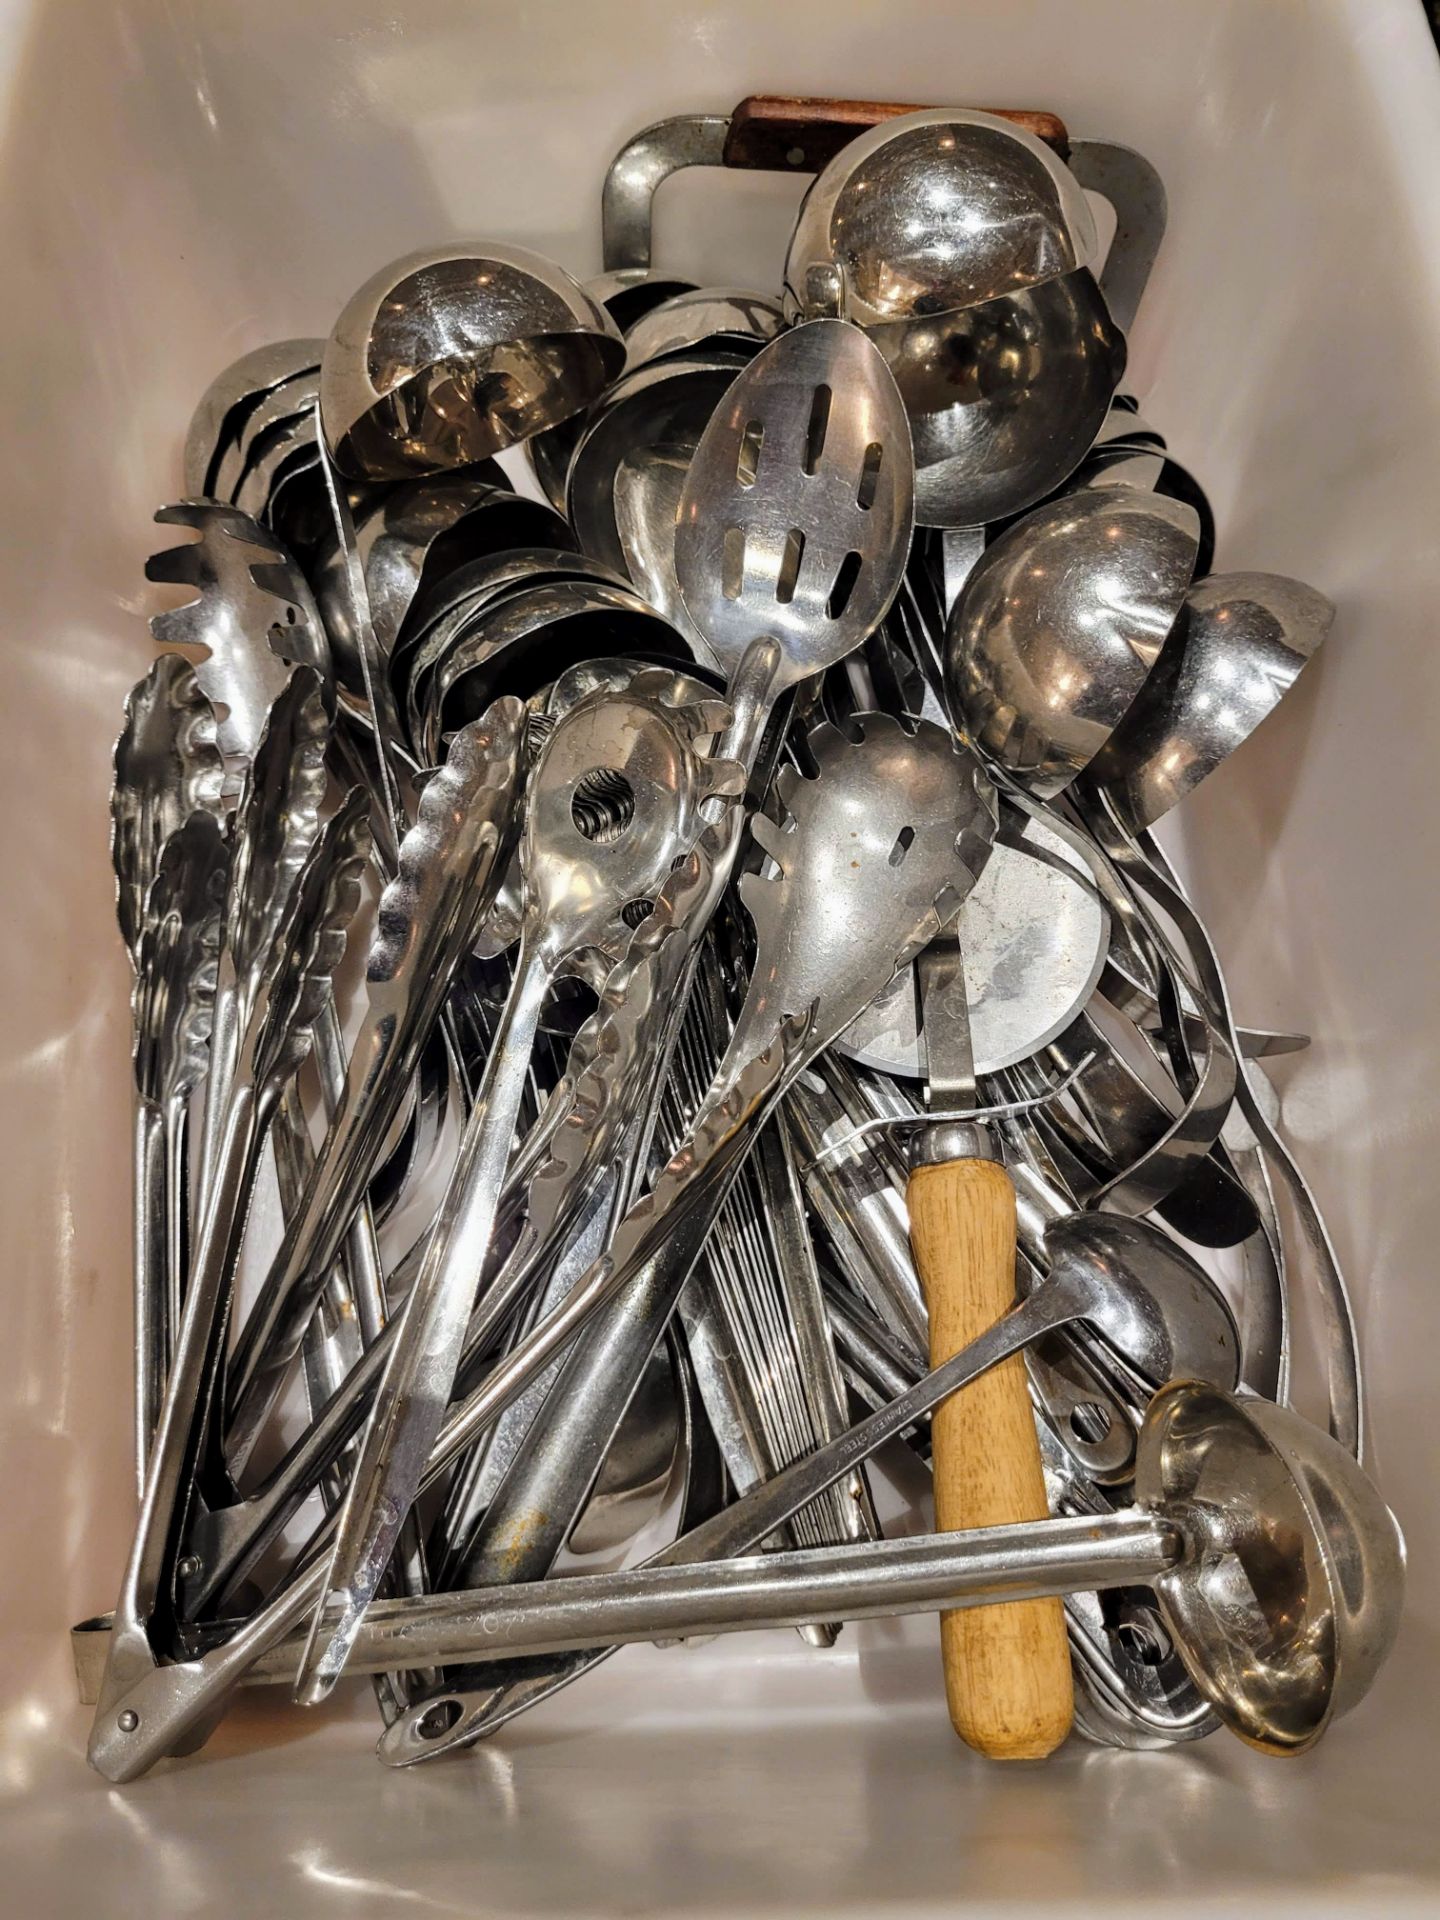 LOT - LARGE ASSORTMENT OF KITCHEN UNTENSILS: LADELS, TONGS, WHISKS, ROLLING PINS, WOODEN SPOONS, - Image 2 of 15